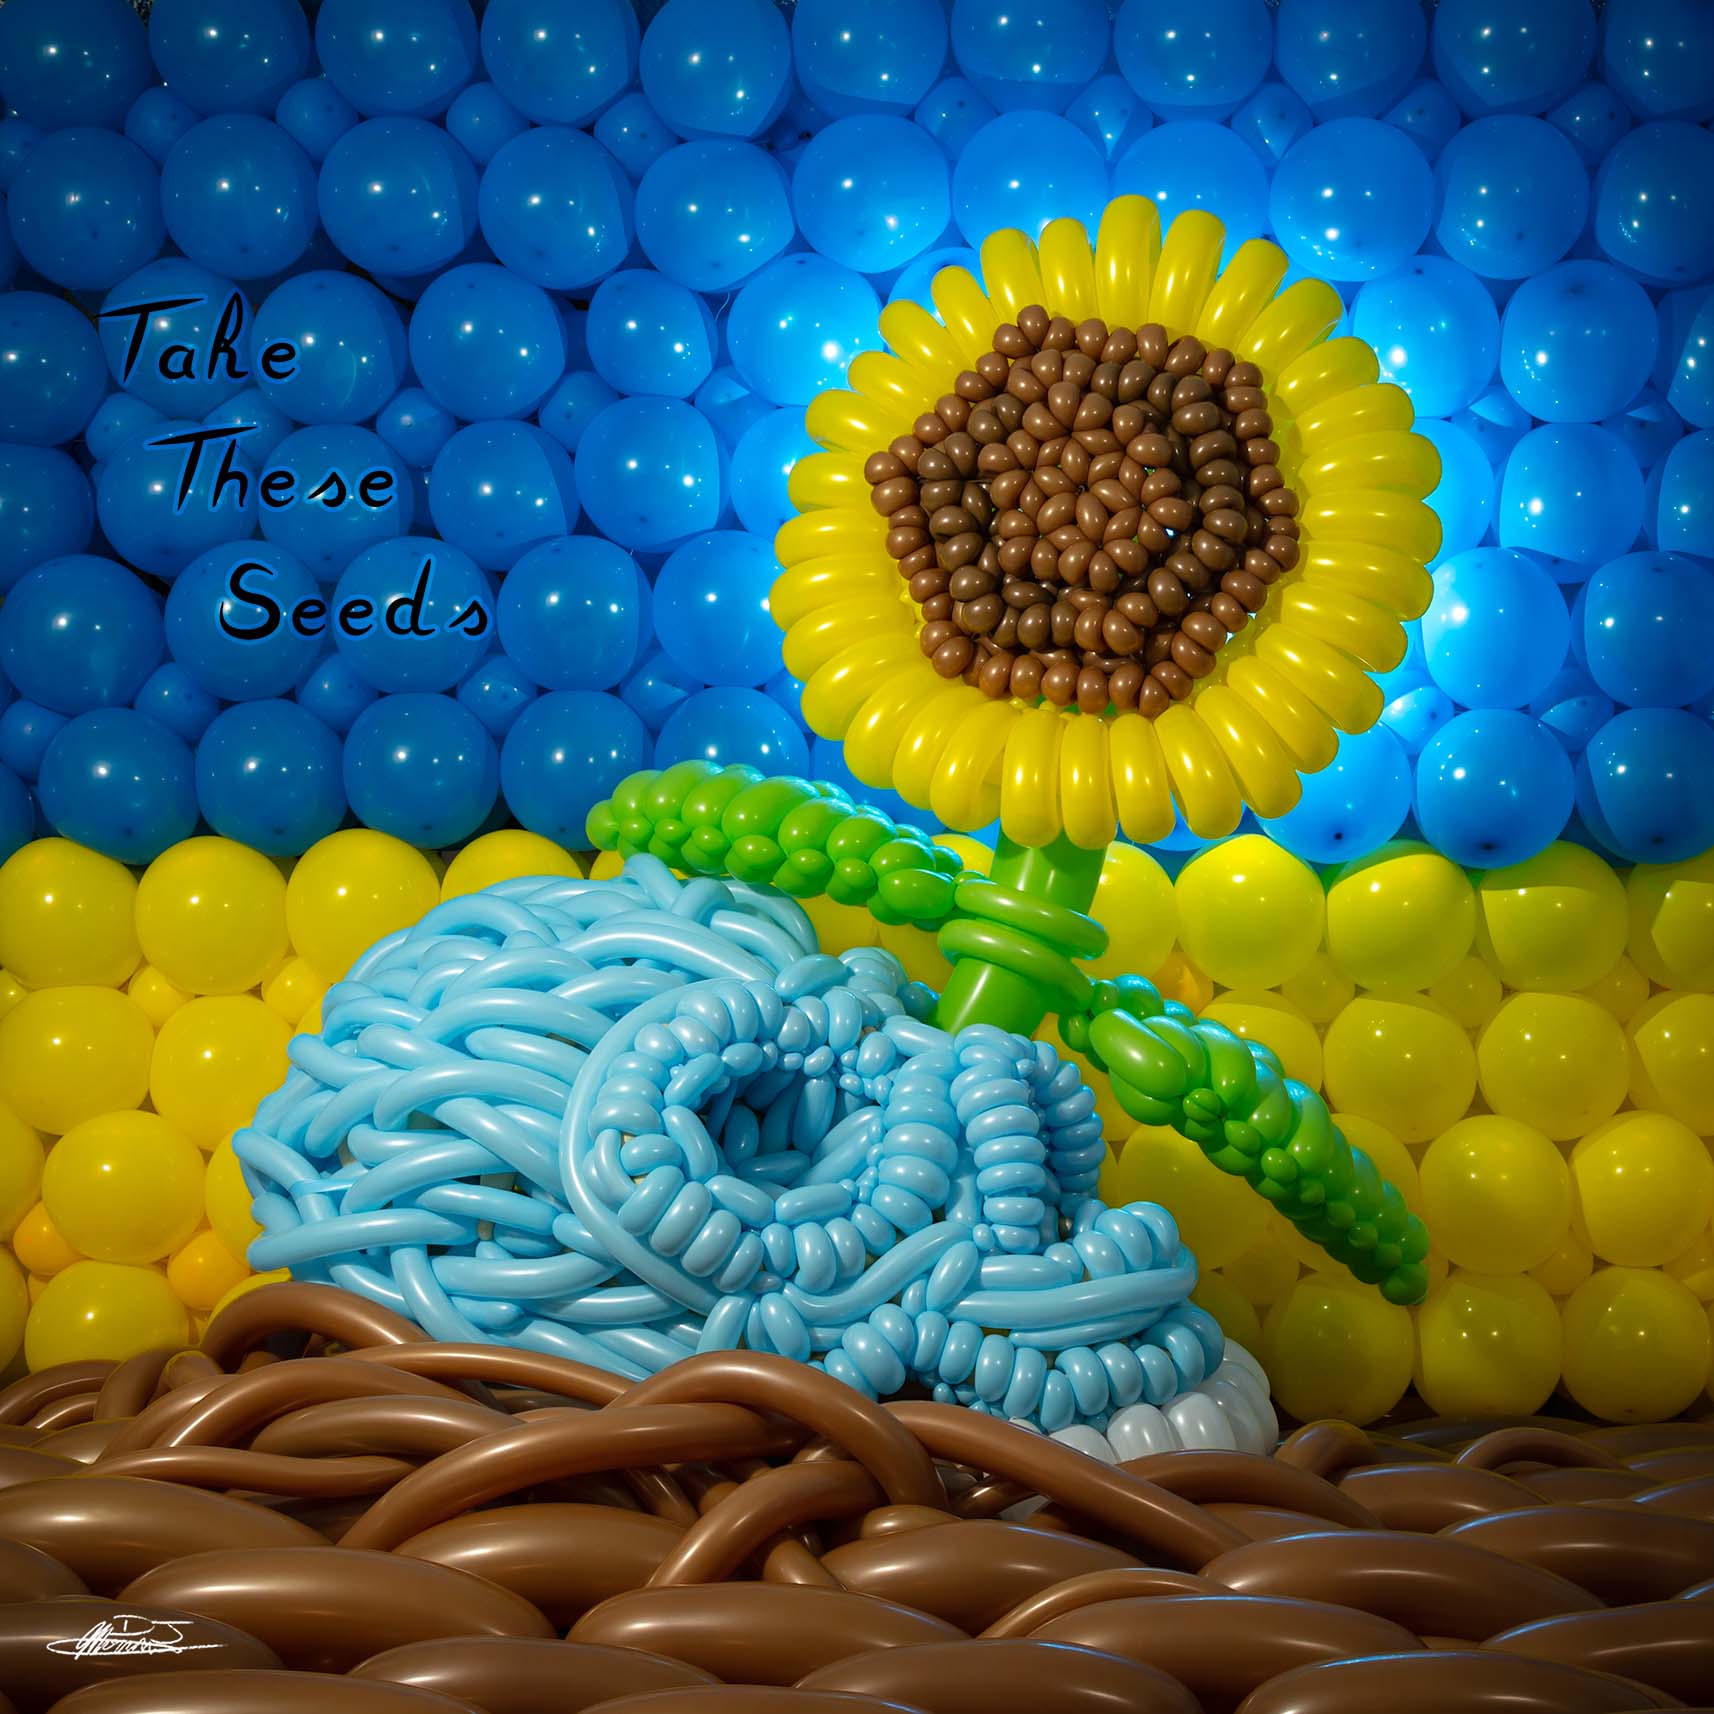 Take These Seeds balloon sculpture of a skull on the ground with a sunflower growing out of eye socket in front of ukranian flag